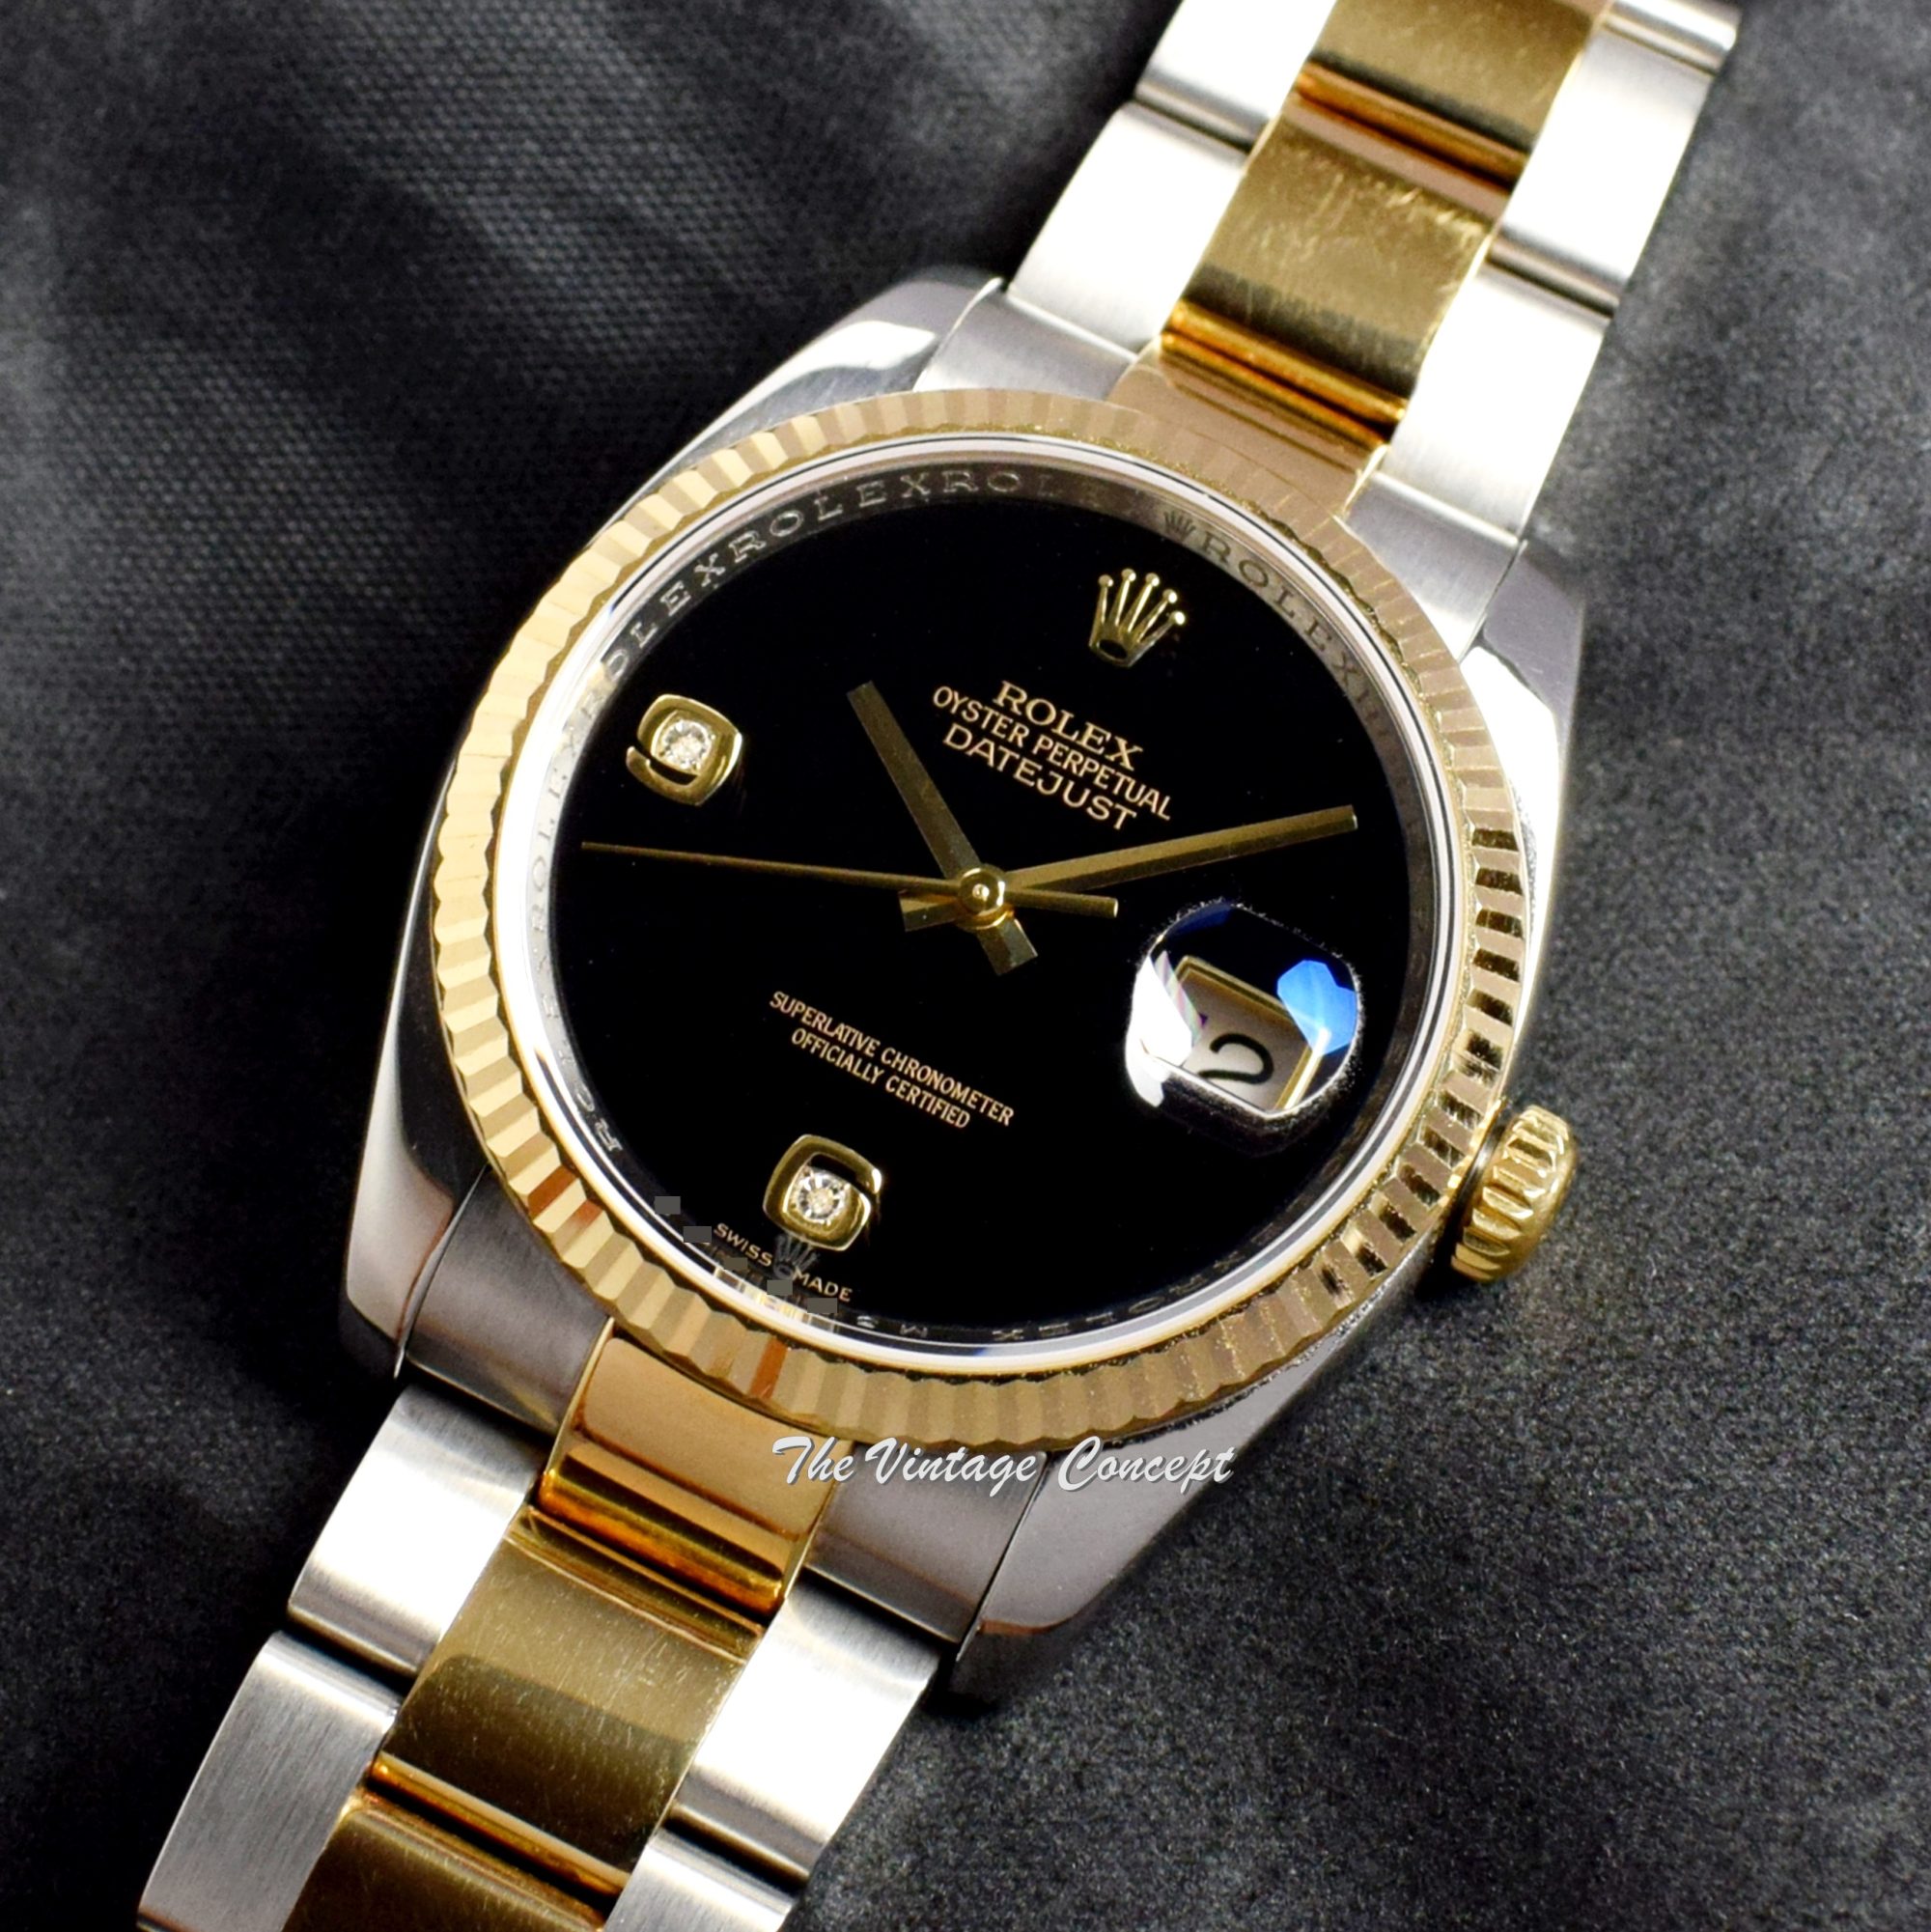 Rolex Datejust Two-Tone Onyx Dial w/ Diamond Indexes 116233 (SOLD) - The Vintage Concept